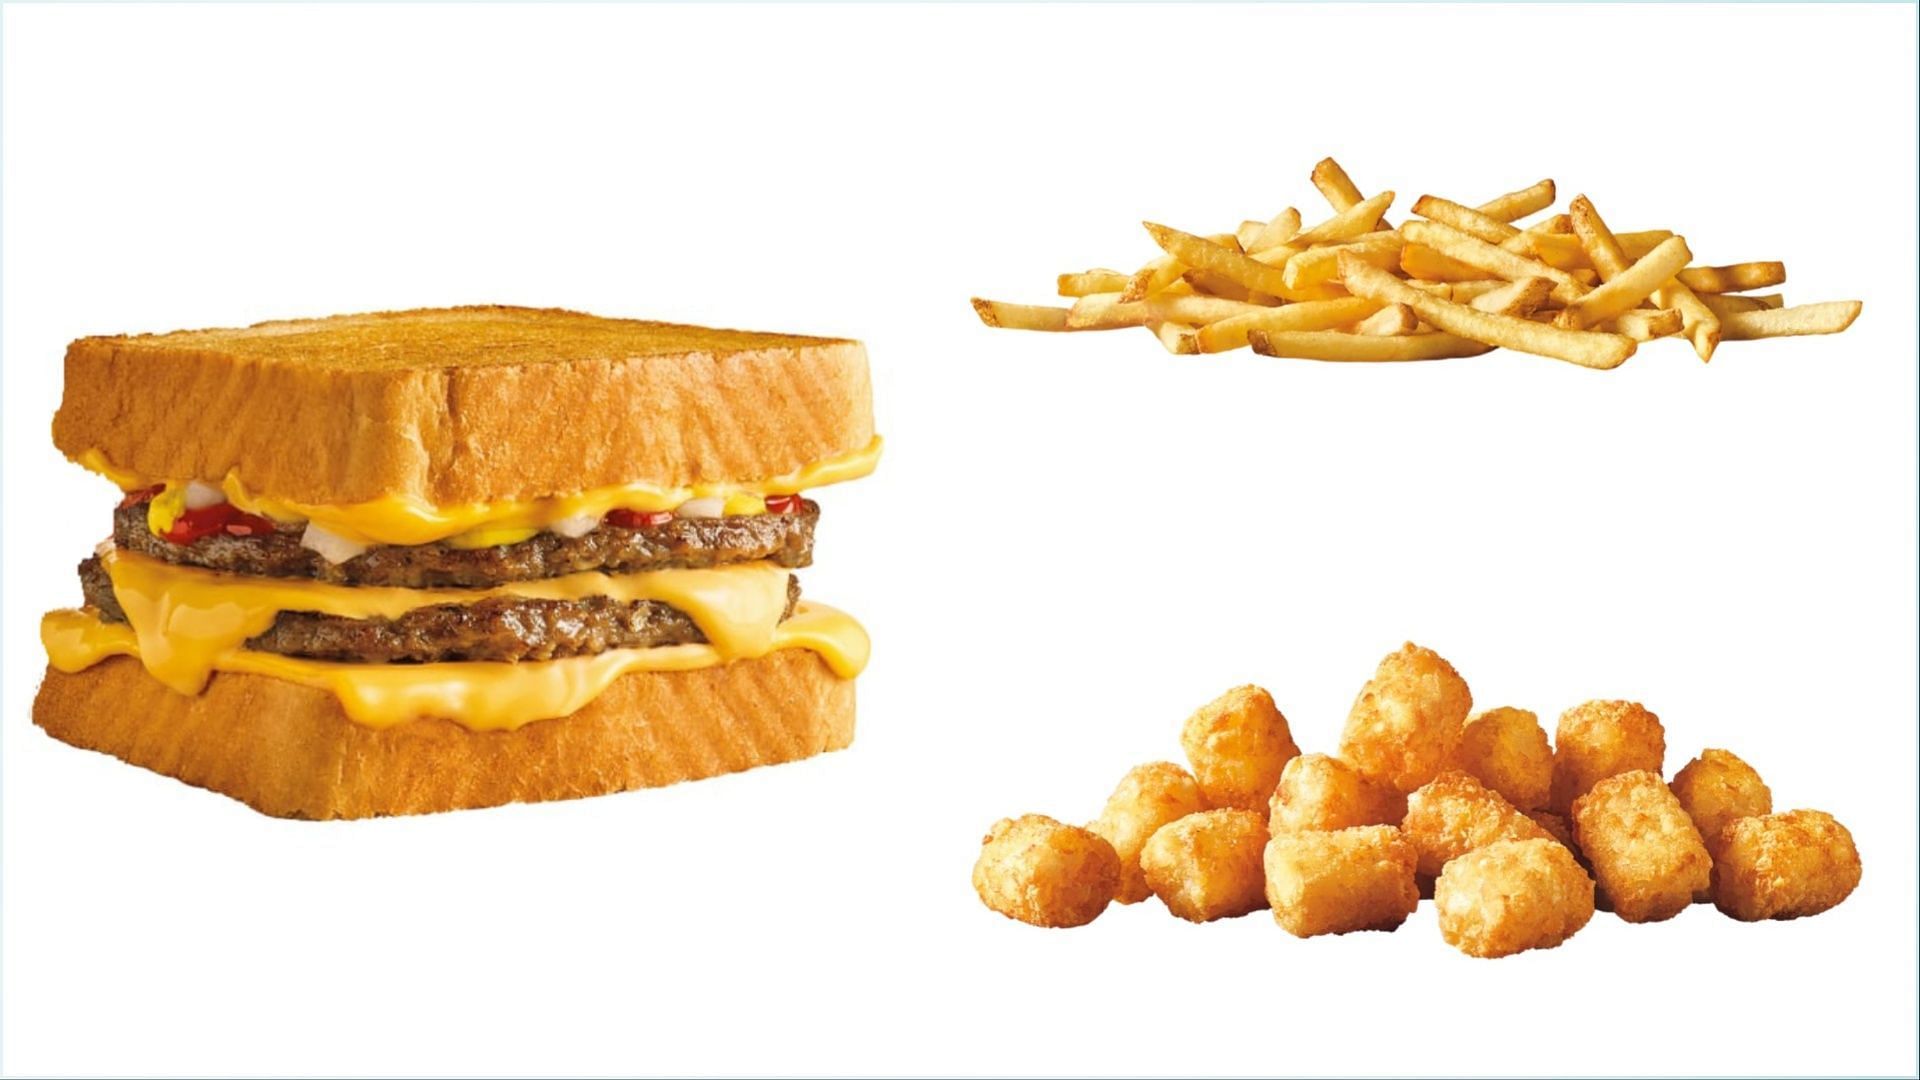 SONIC expands US menu with new grilled cheese burger